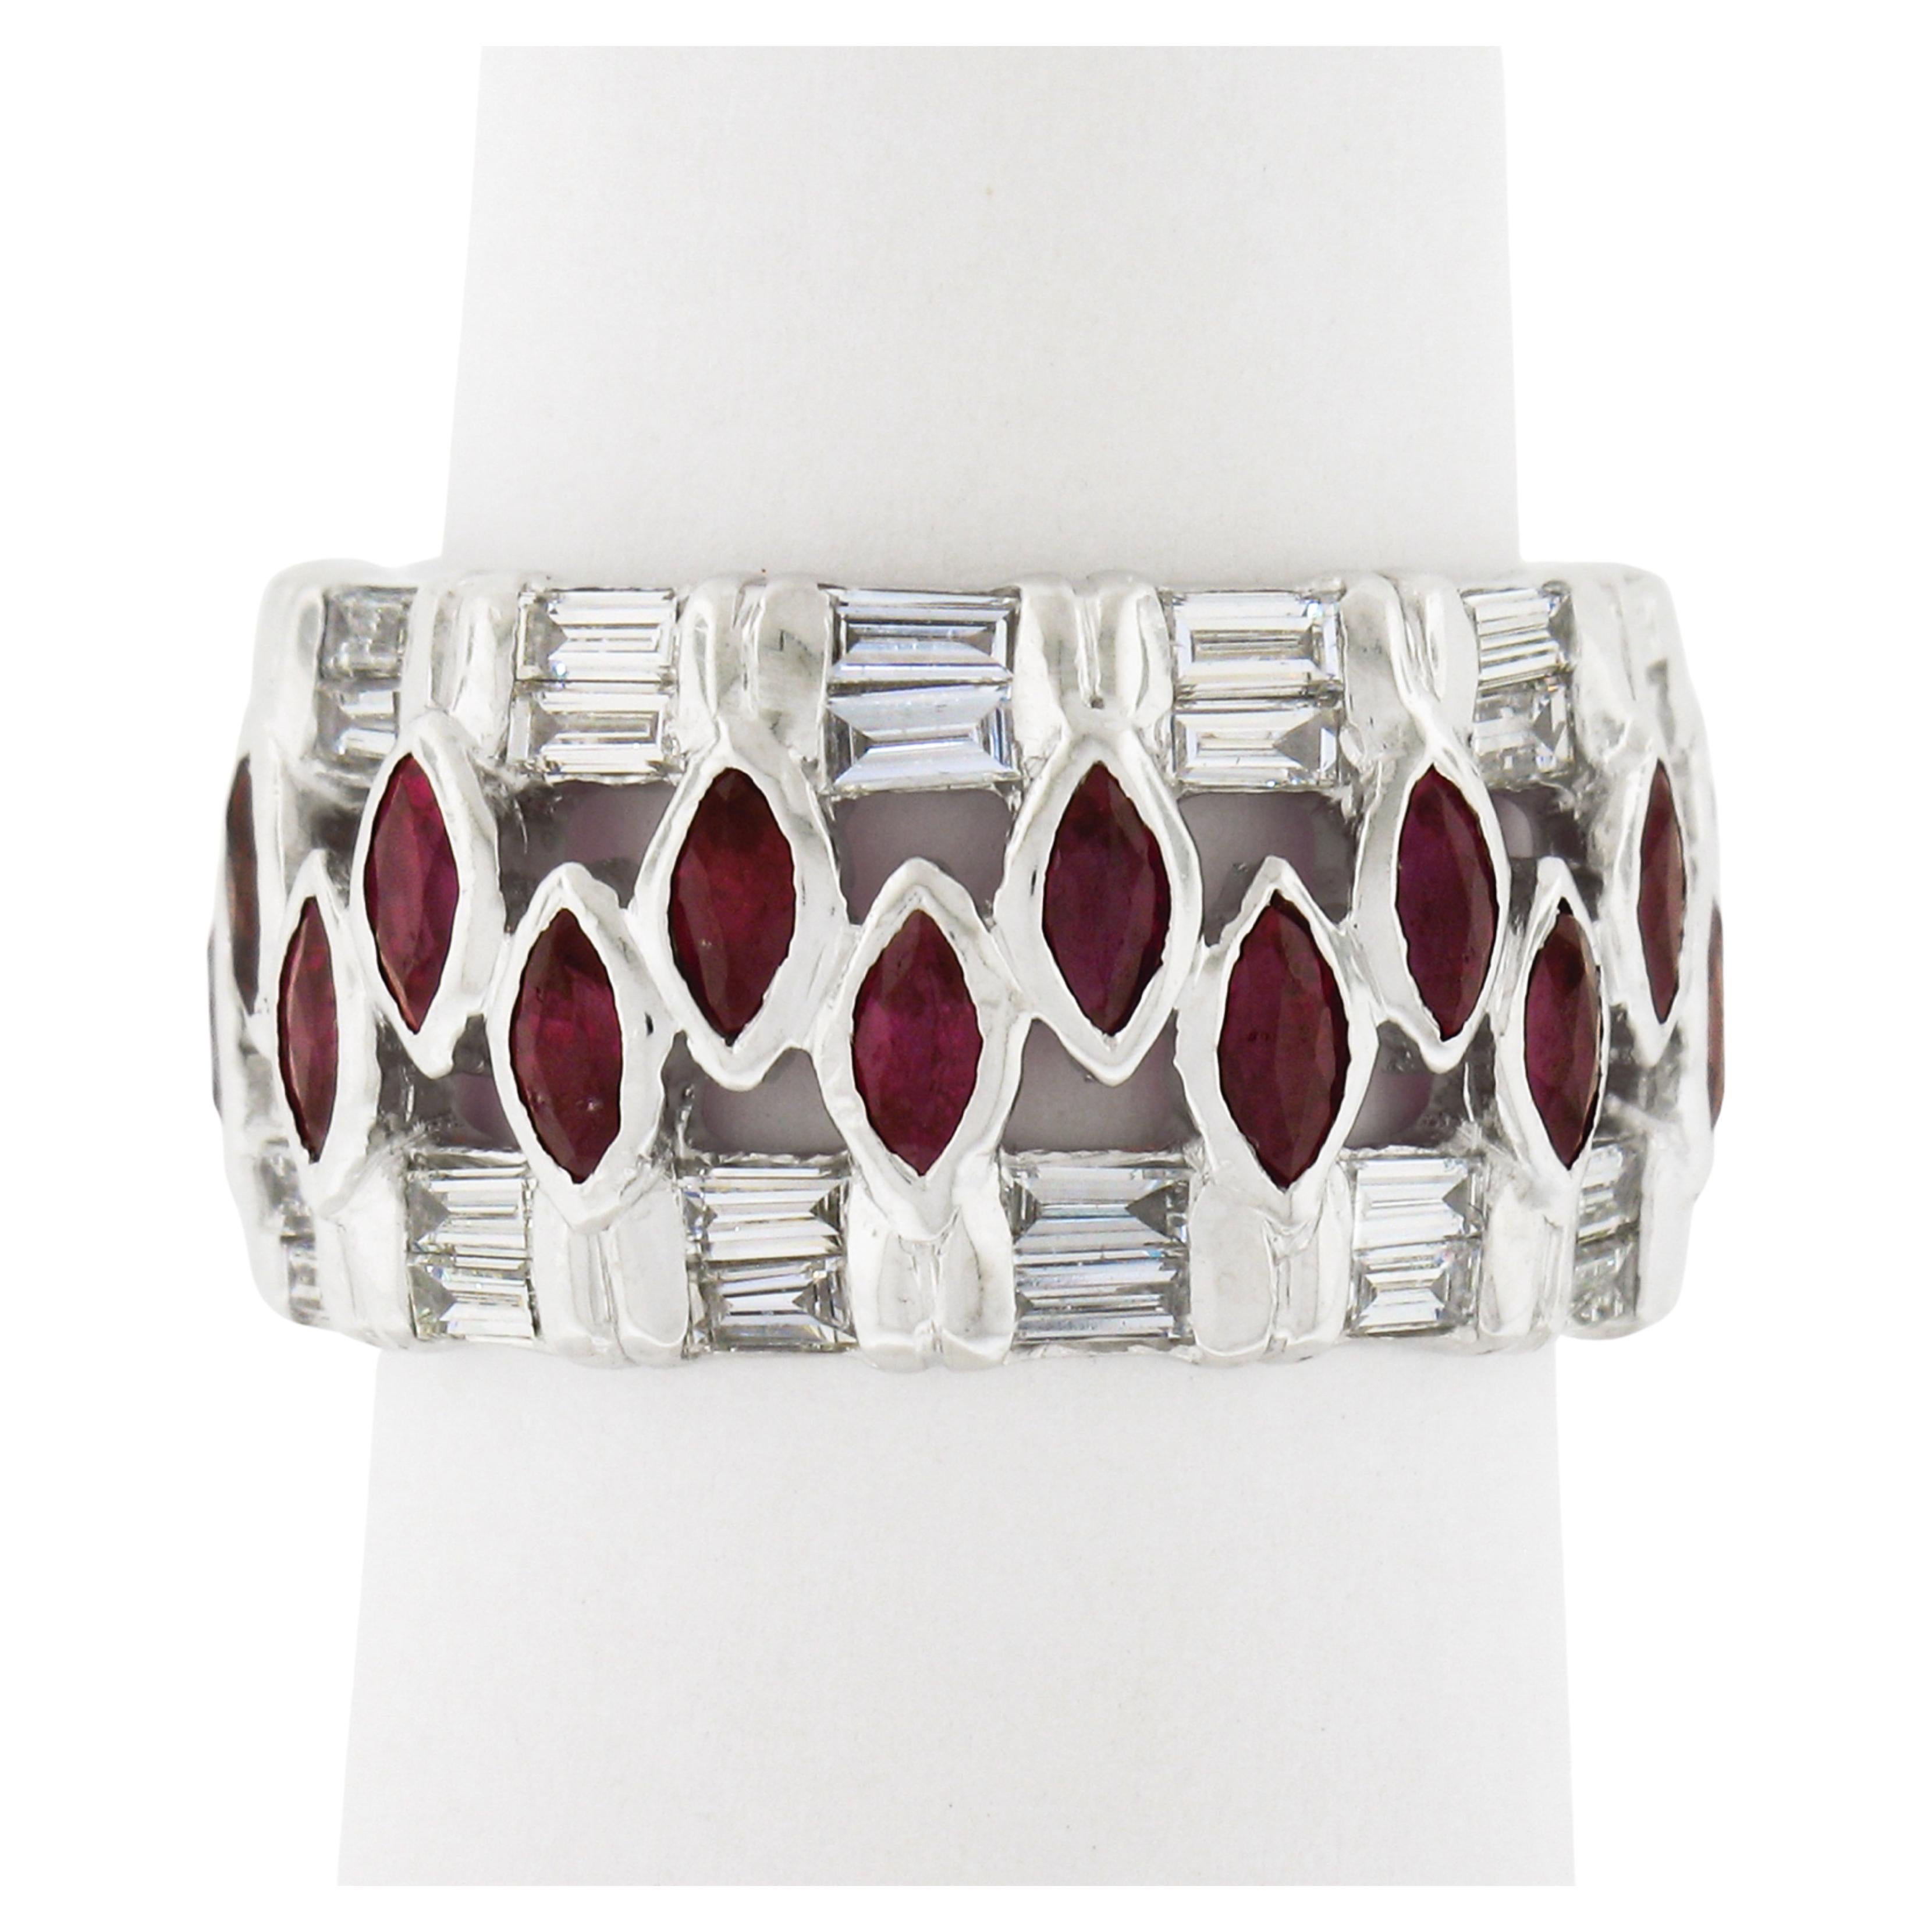 This stunning wide eternity cocktail band ring that is crafted in solid 18k white gold and features a unique design set with a center row of marquise rubies and two side rows of baguette diamonds. The rubies are neatly set in fine bezel settings and